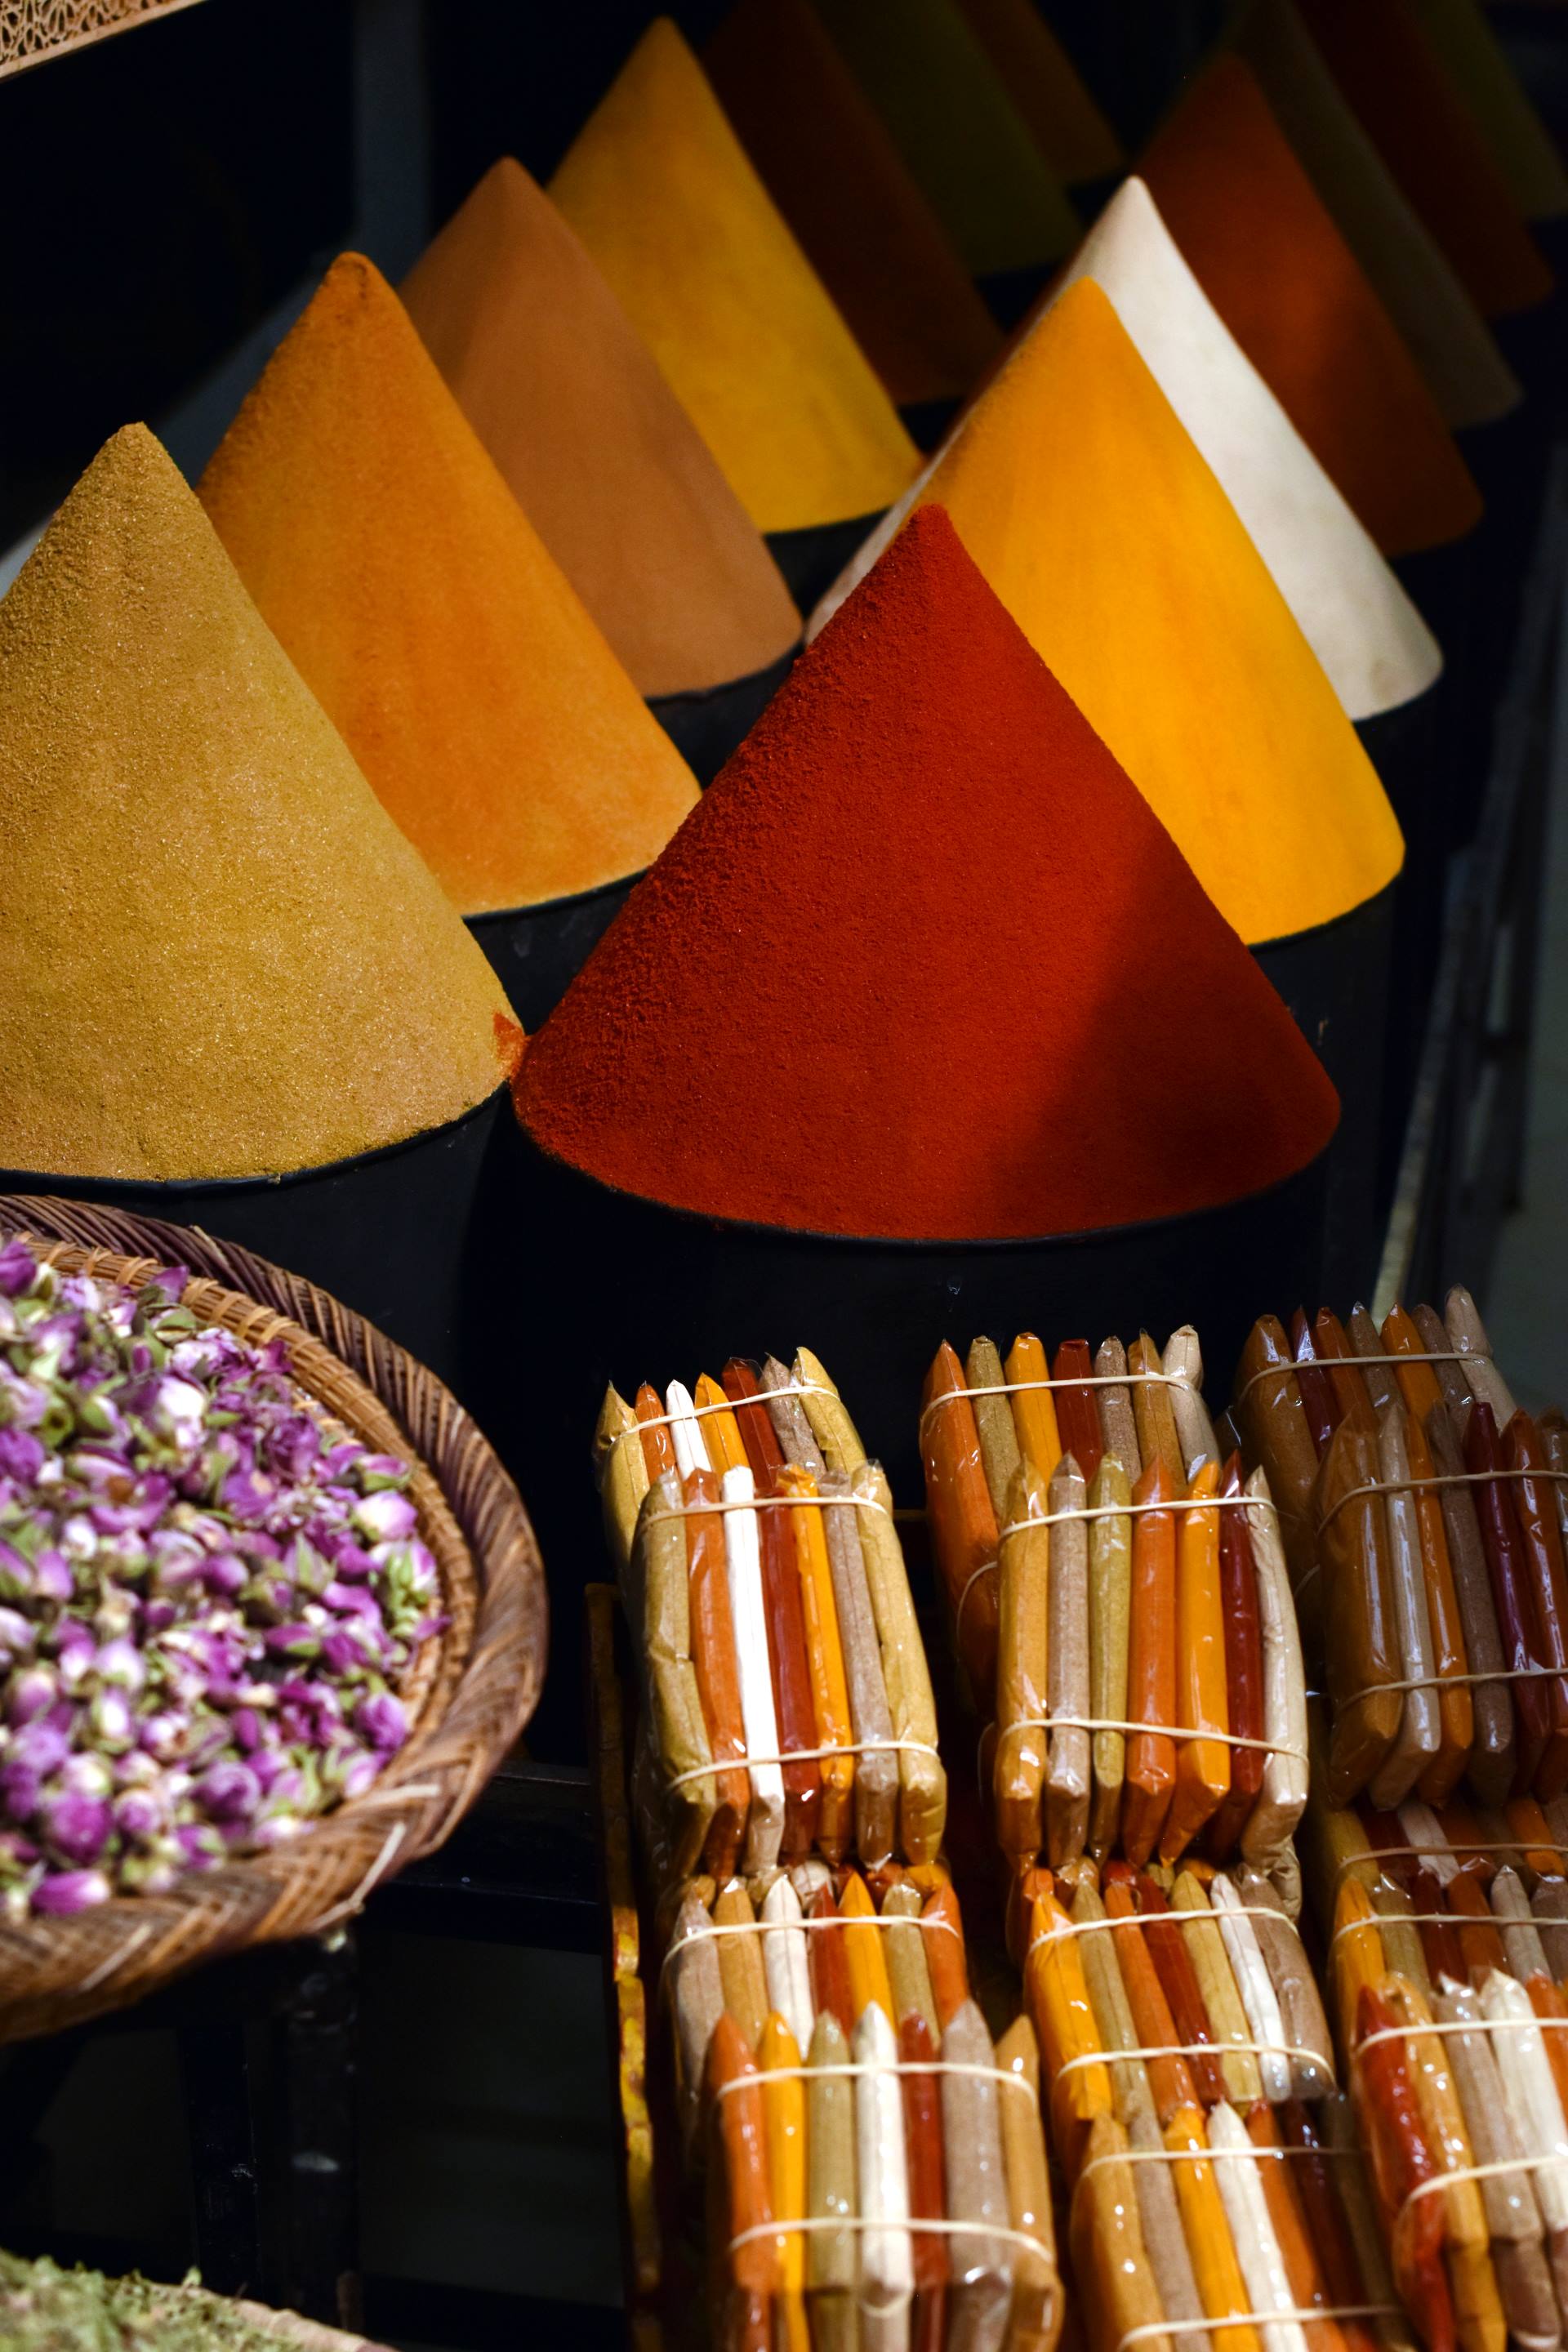 Moroccan spices at the market